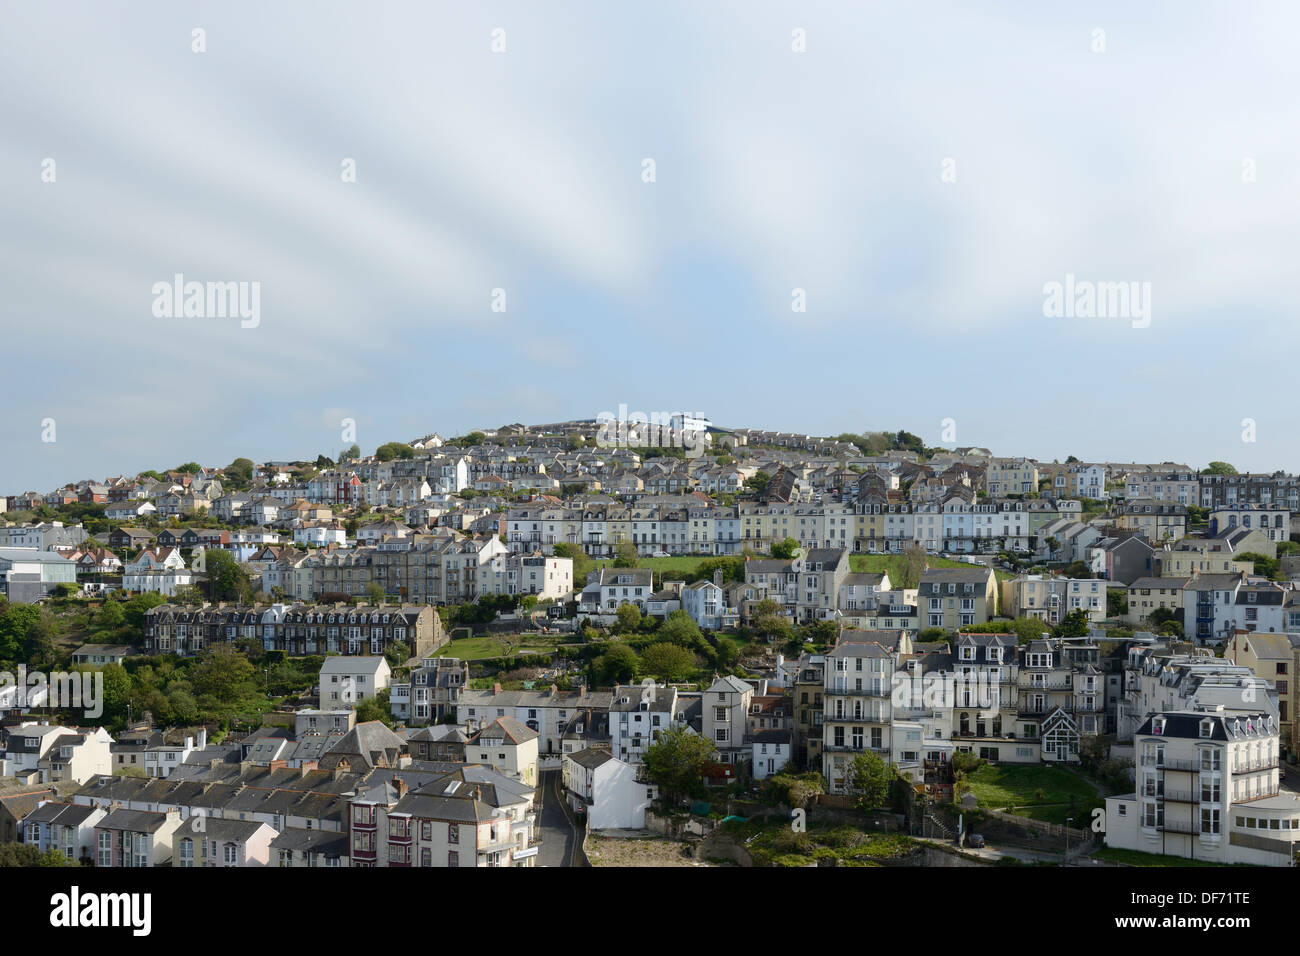 Houses built on the sides of a hill in Ilfracombe, North Devon, UK. Stock Photo